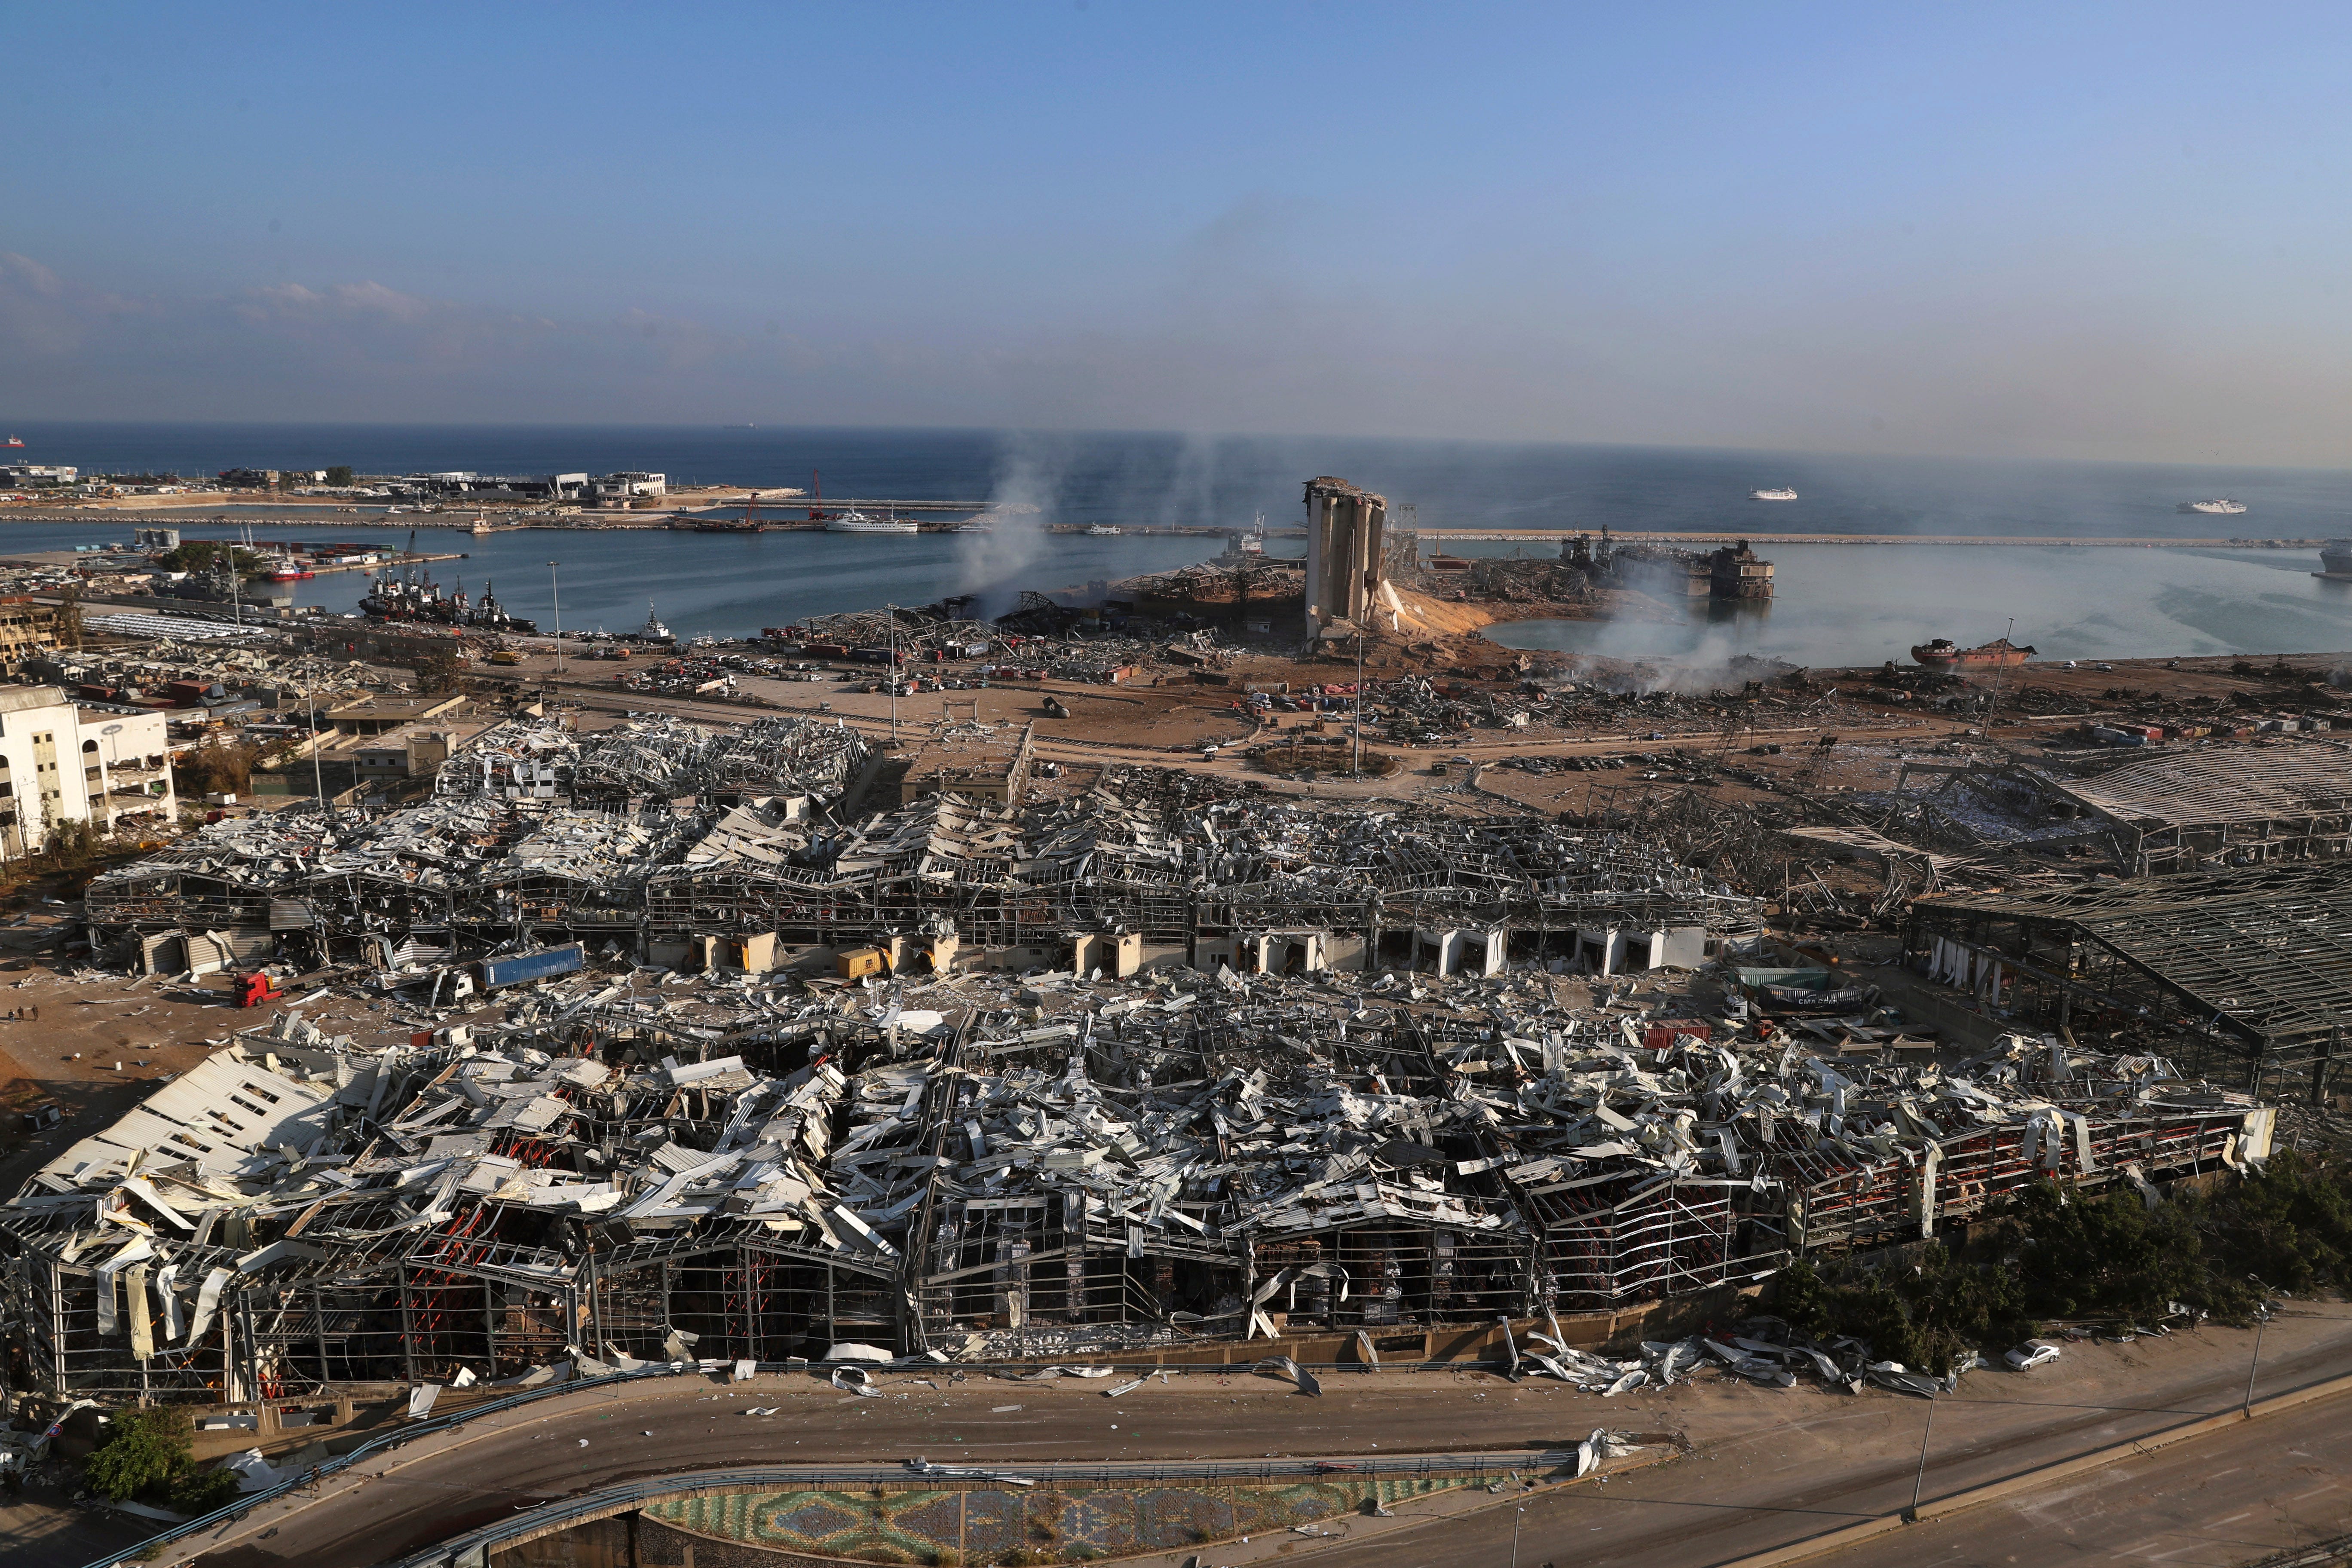 This photo shows a general view of the scene of an explosion that hit the seaport of Beirut, Lebanon, Wednesday, Aug. 5, 2020. A massive explosion rocked Beirut on Tuesday, flattening much of the city's port, damaging buildings across the capital and sending a giant mushroom cloud into the sky.